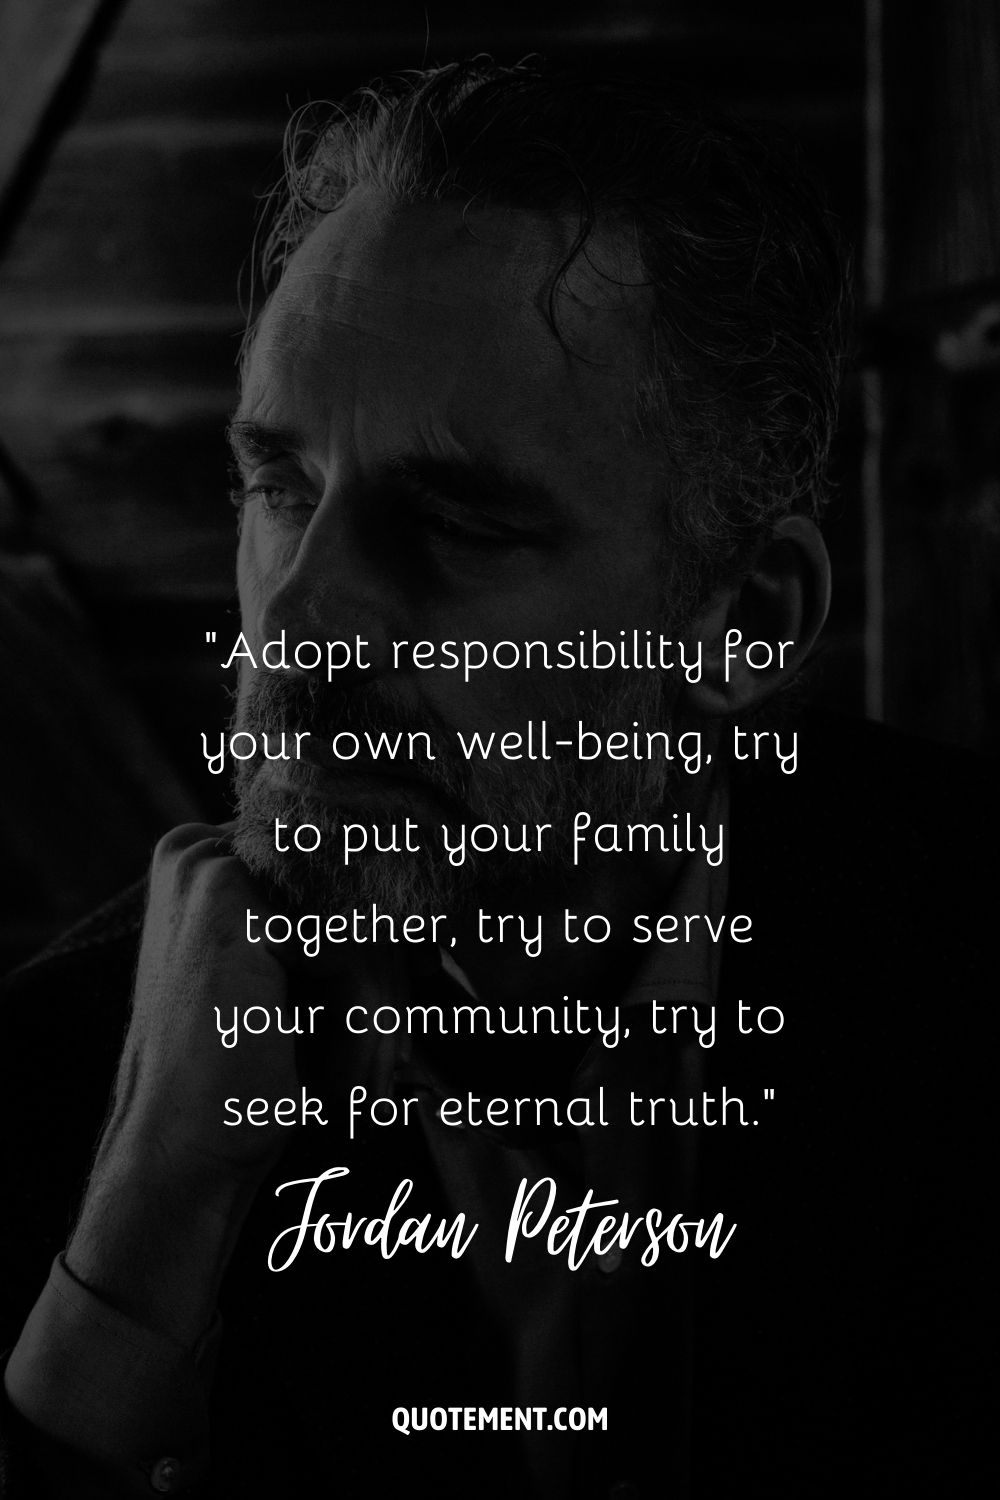 Adopt responsibility for your own well-being, try to put your family together, try to serve your community, try to seek for eternal truth.